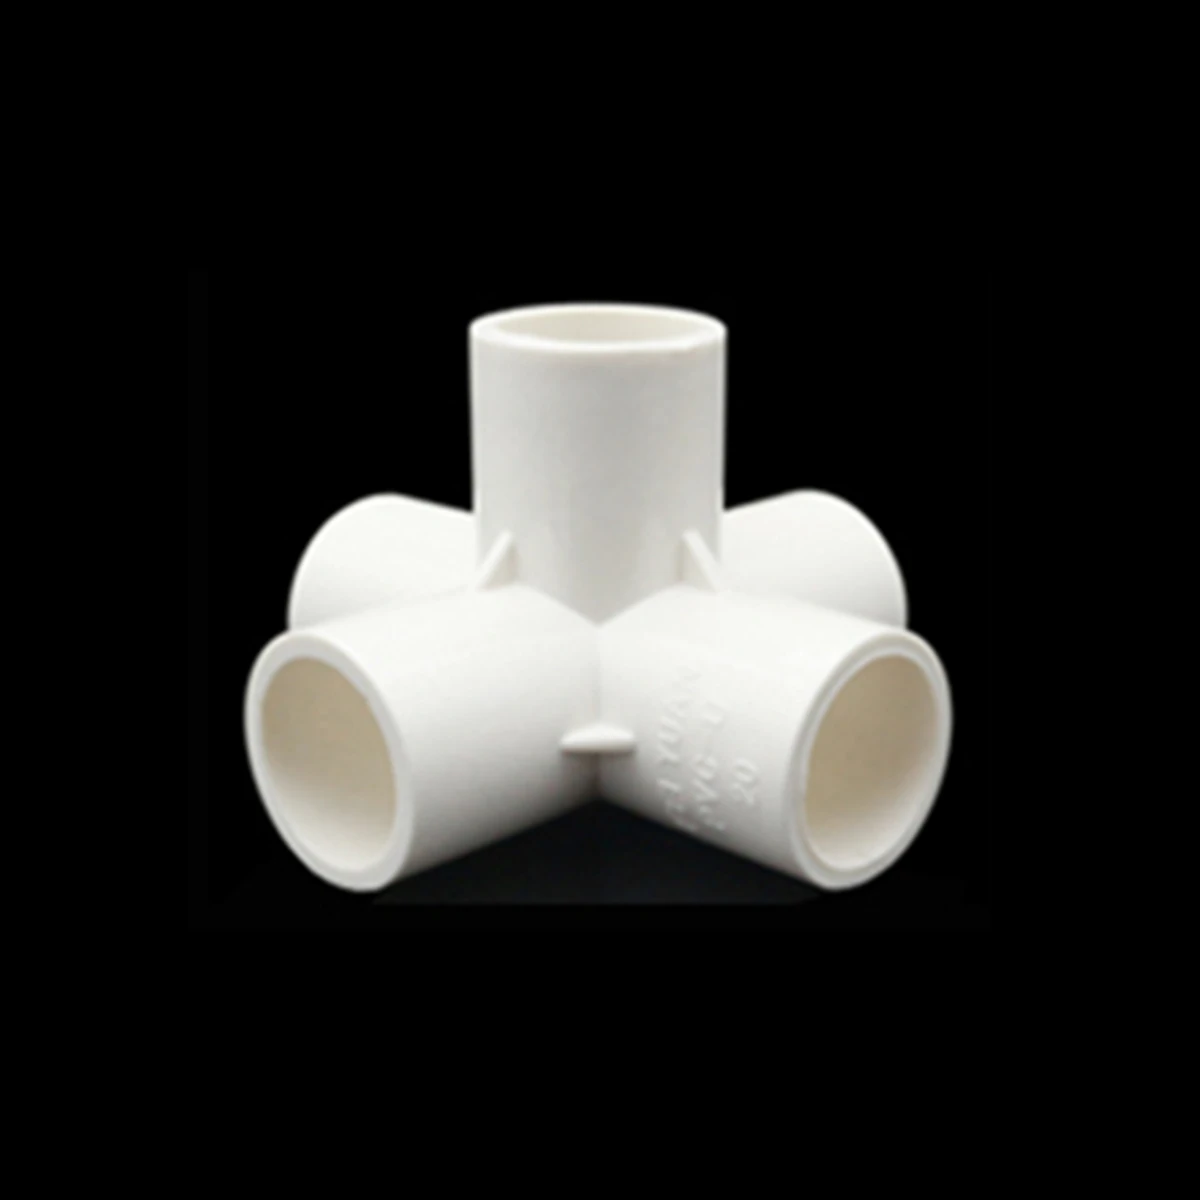 20/25/32/40mm White PVC Pipe Fittings Straight Elbow Tee Cross Connector Water Pipe Adapter 3 4 5 6 Ways Joints